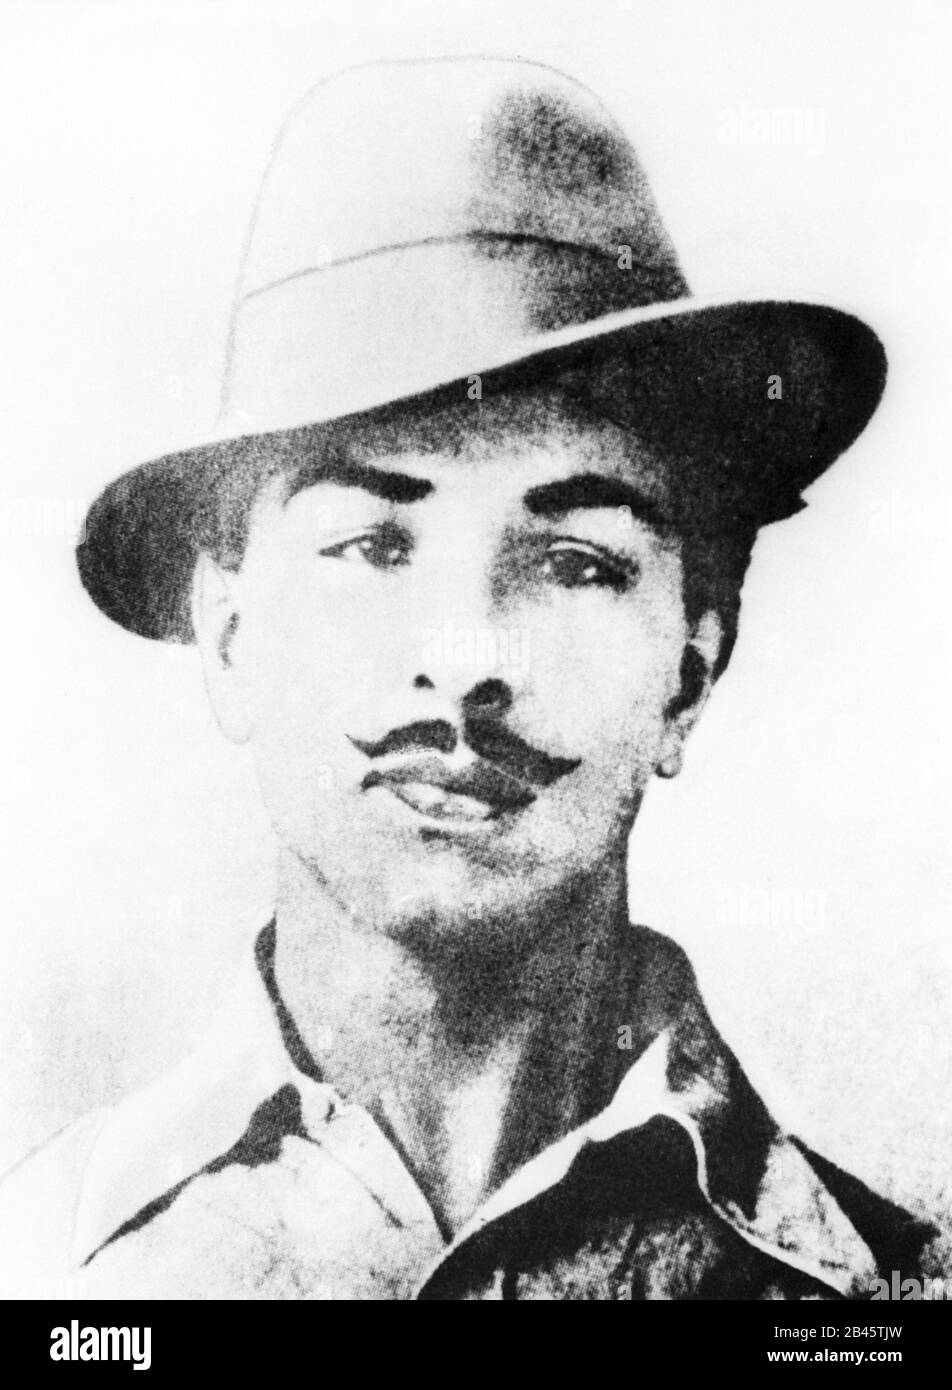 Bhagat singh Black and White Stock Photos & Images - Alamy